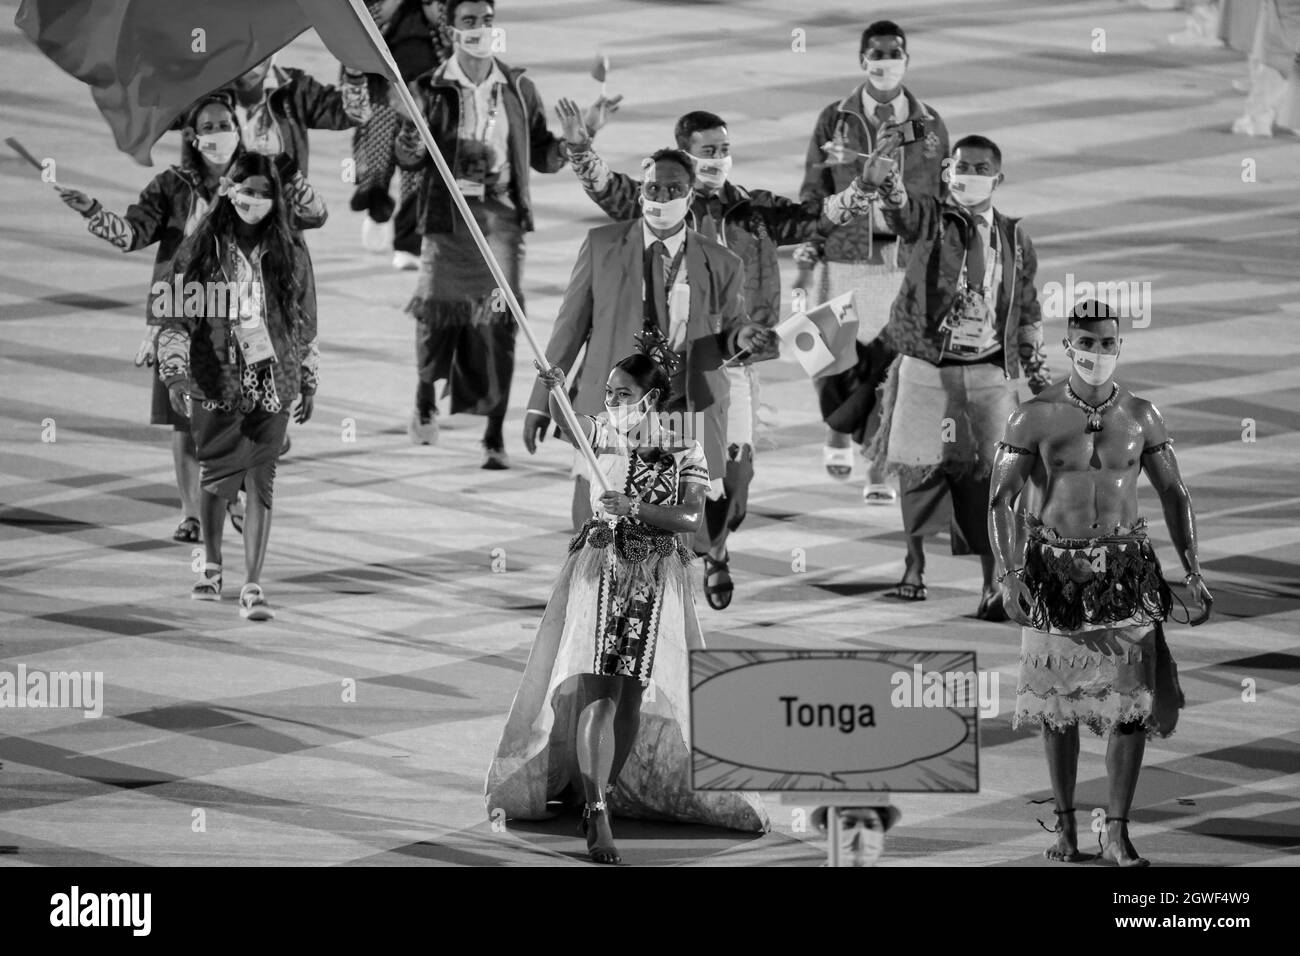 JULY 23rd, 2021 - TOKYO, JAPAN: Tonga's flag bearers Malia Paseka and Pita Taufatofua enter the Olympic Stadium with their delegation during the Parad Stock Photo